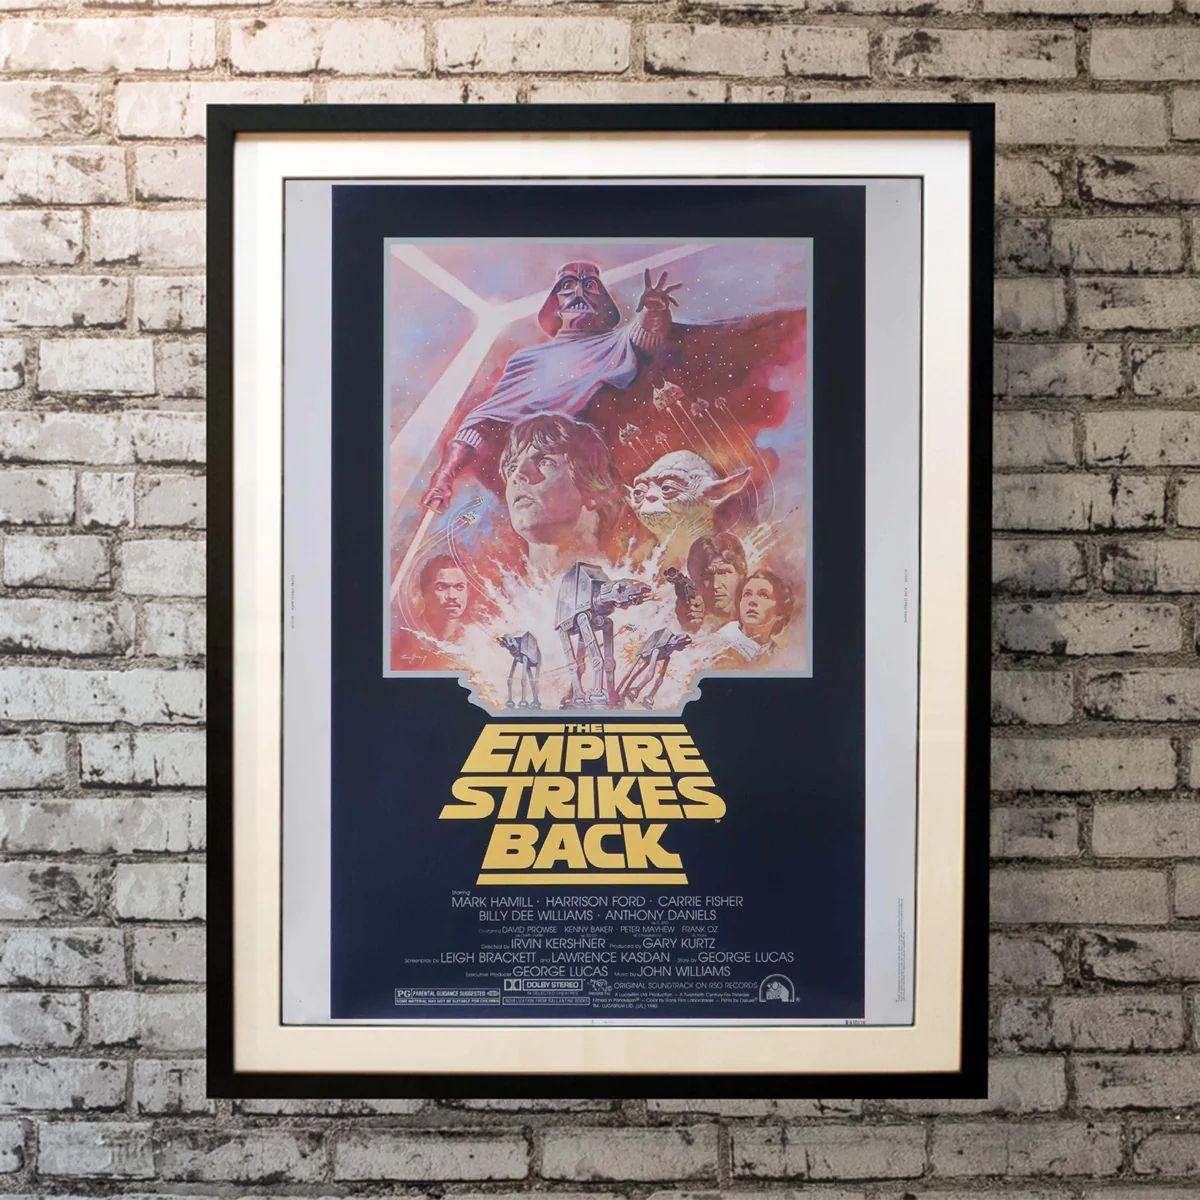 The Empire Strikes Back, Unframed Poster, 1981R

Original 30 x 40 (30 X 40 Inches). Darth Vader is adamant about turning Luke Skywalker to the dark side. Master Yoda trains Luke to become a Jedi Knight while his friends try to fend off the Imperial